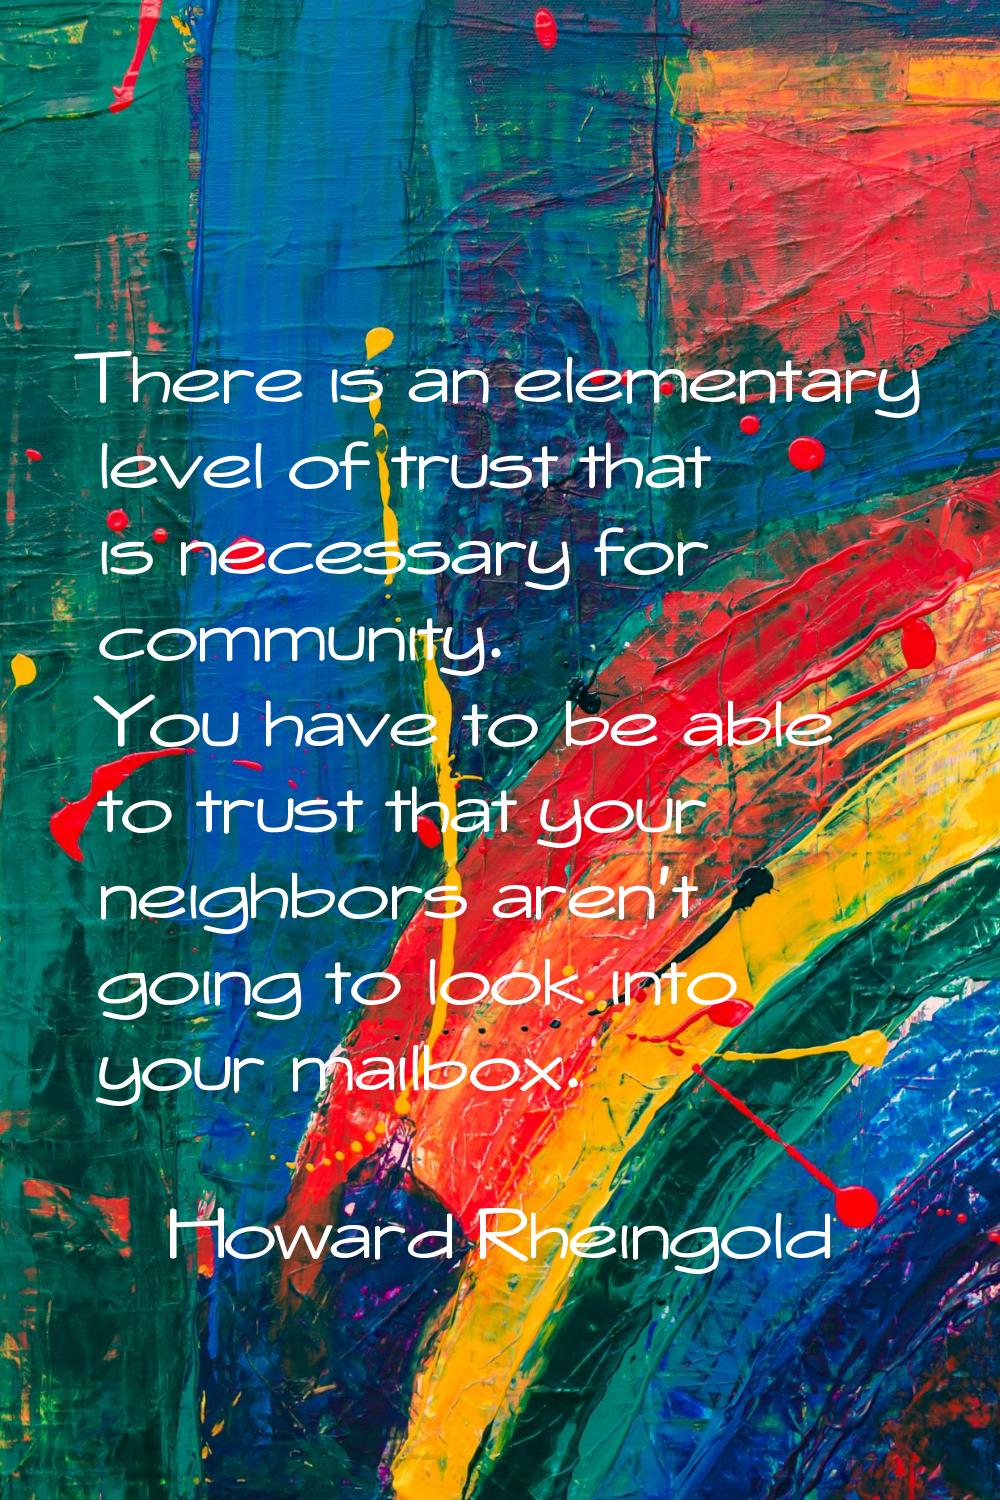 There is an elementary level of trust that is necessary for community. You have to be able to trust